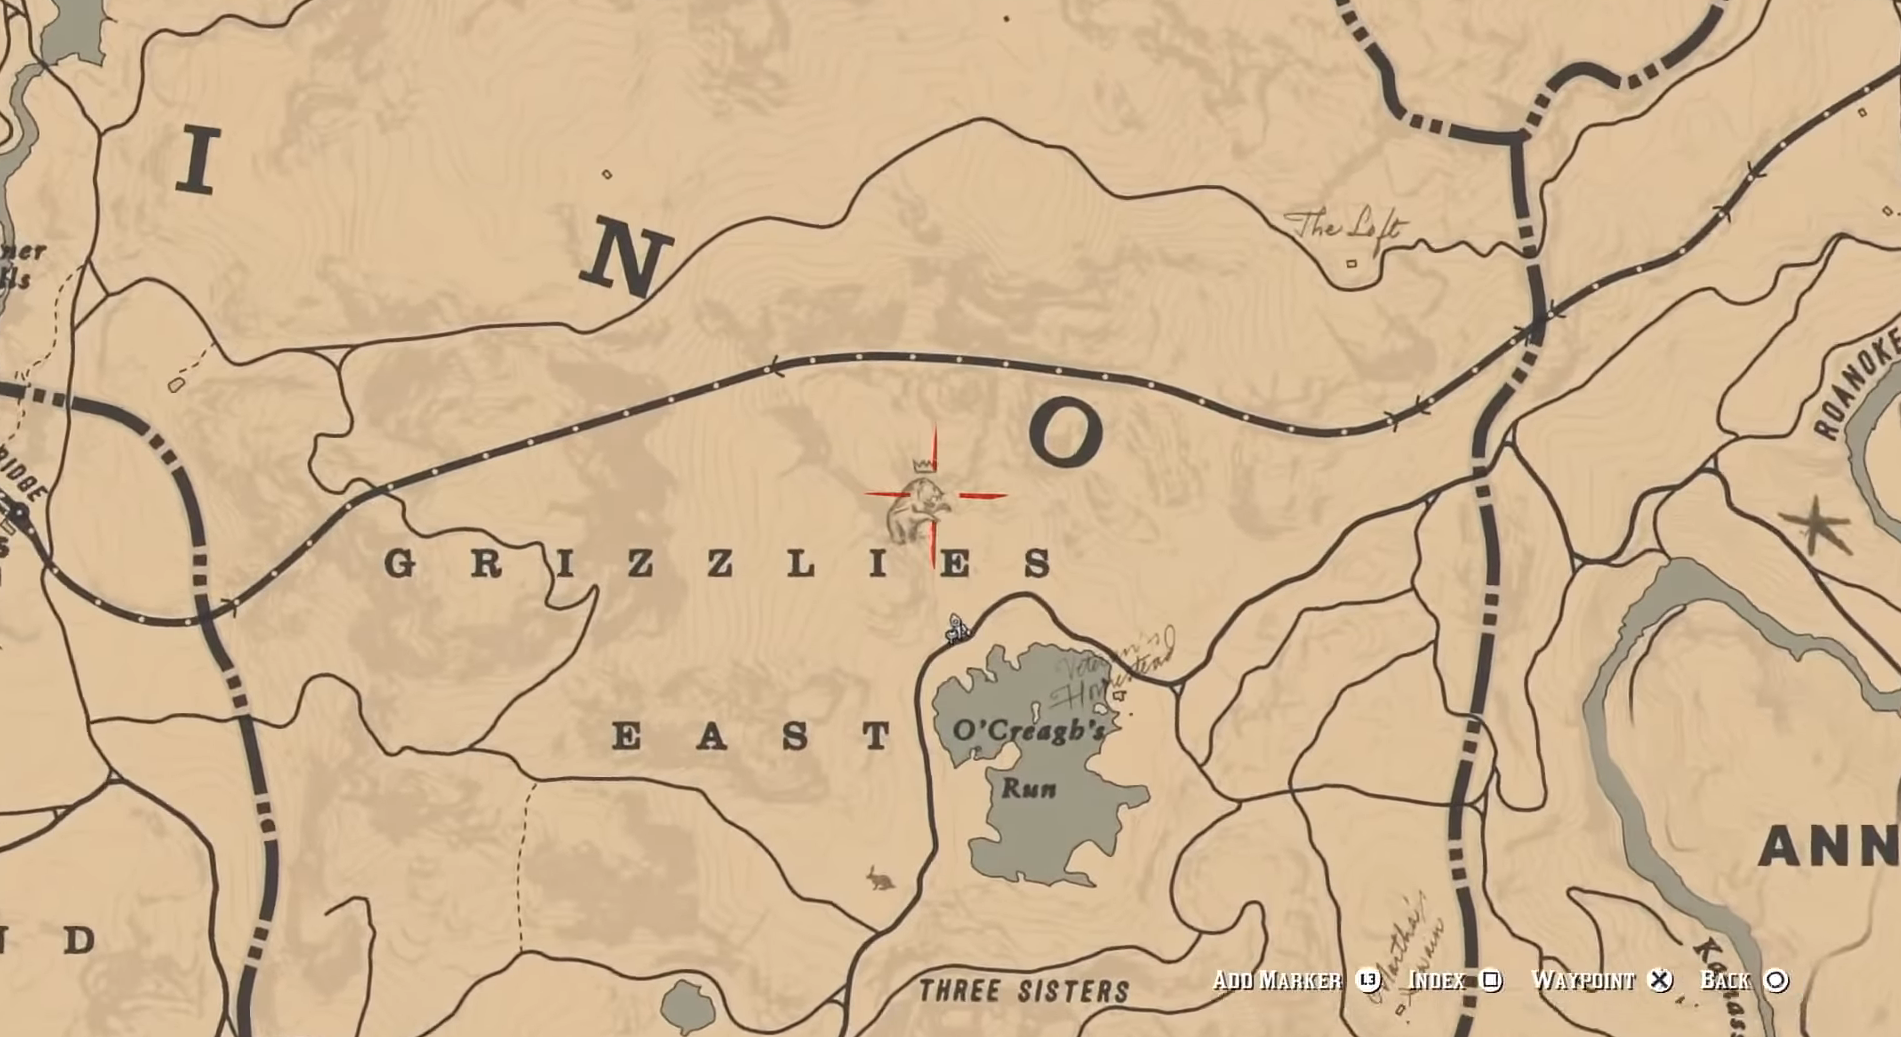 lounge Mere Rouse Red Dead Redemption 2 Legendary Bear Location - eXputer.com